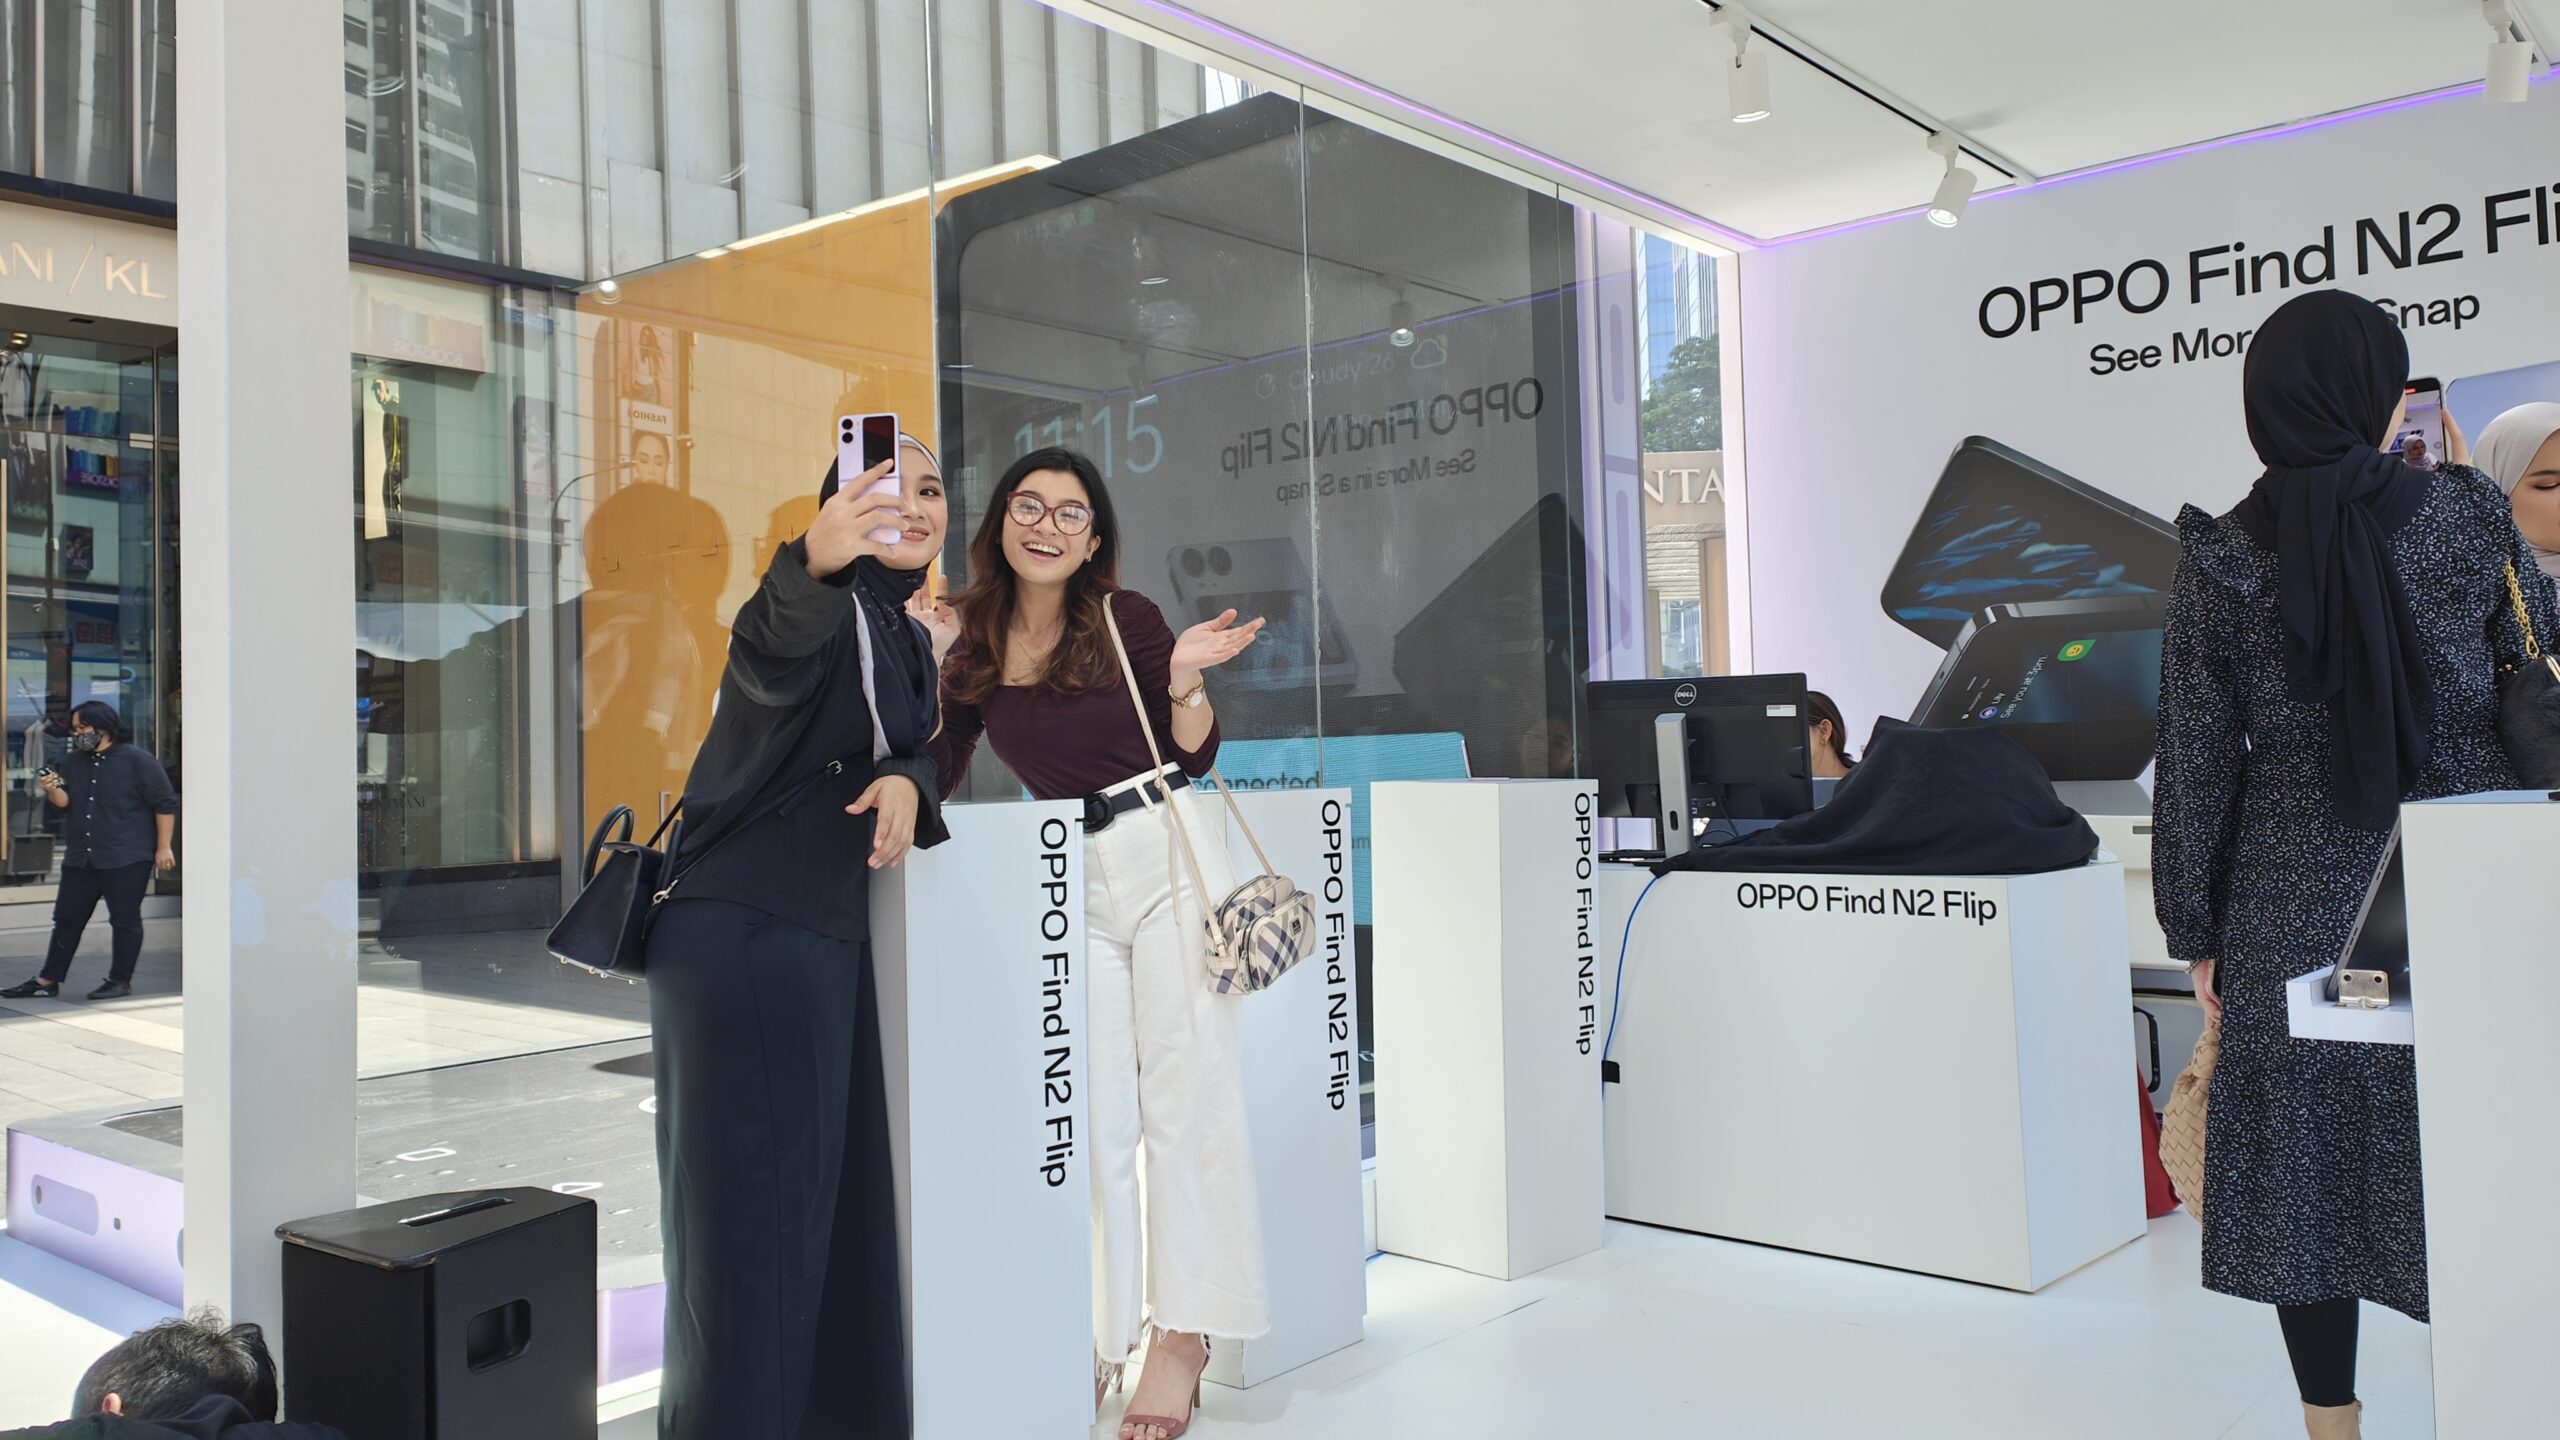 Oppo find n2 flip pop-up experience store showcases the biggest flip structure in malaysia | weirdkaya